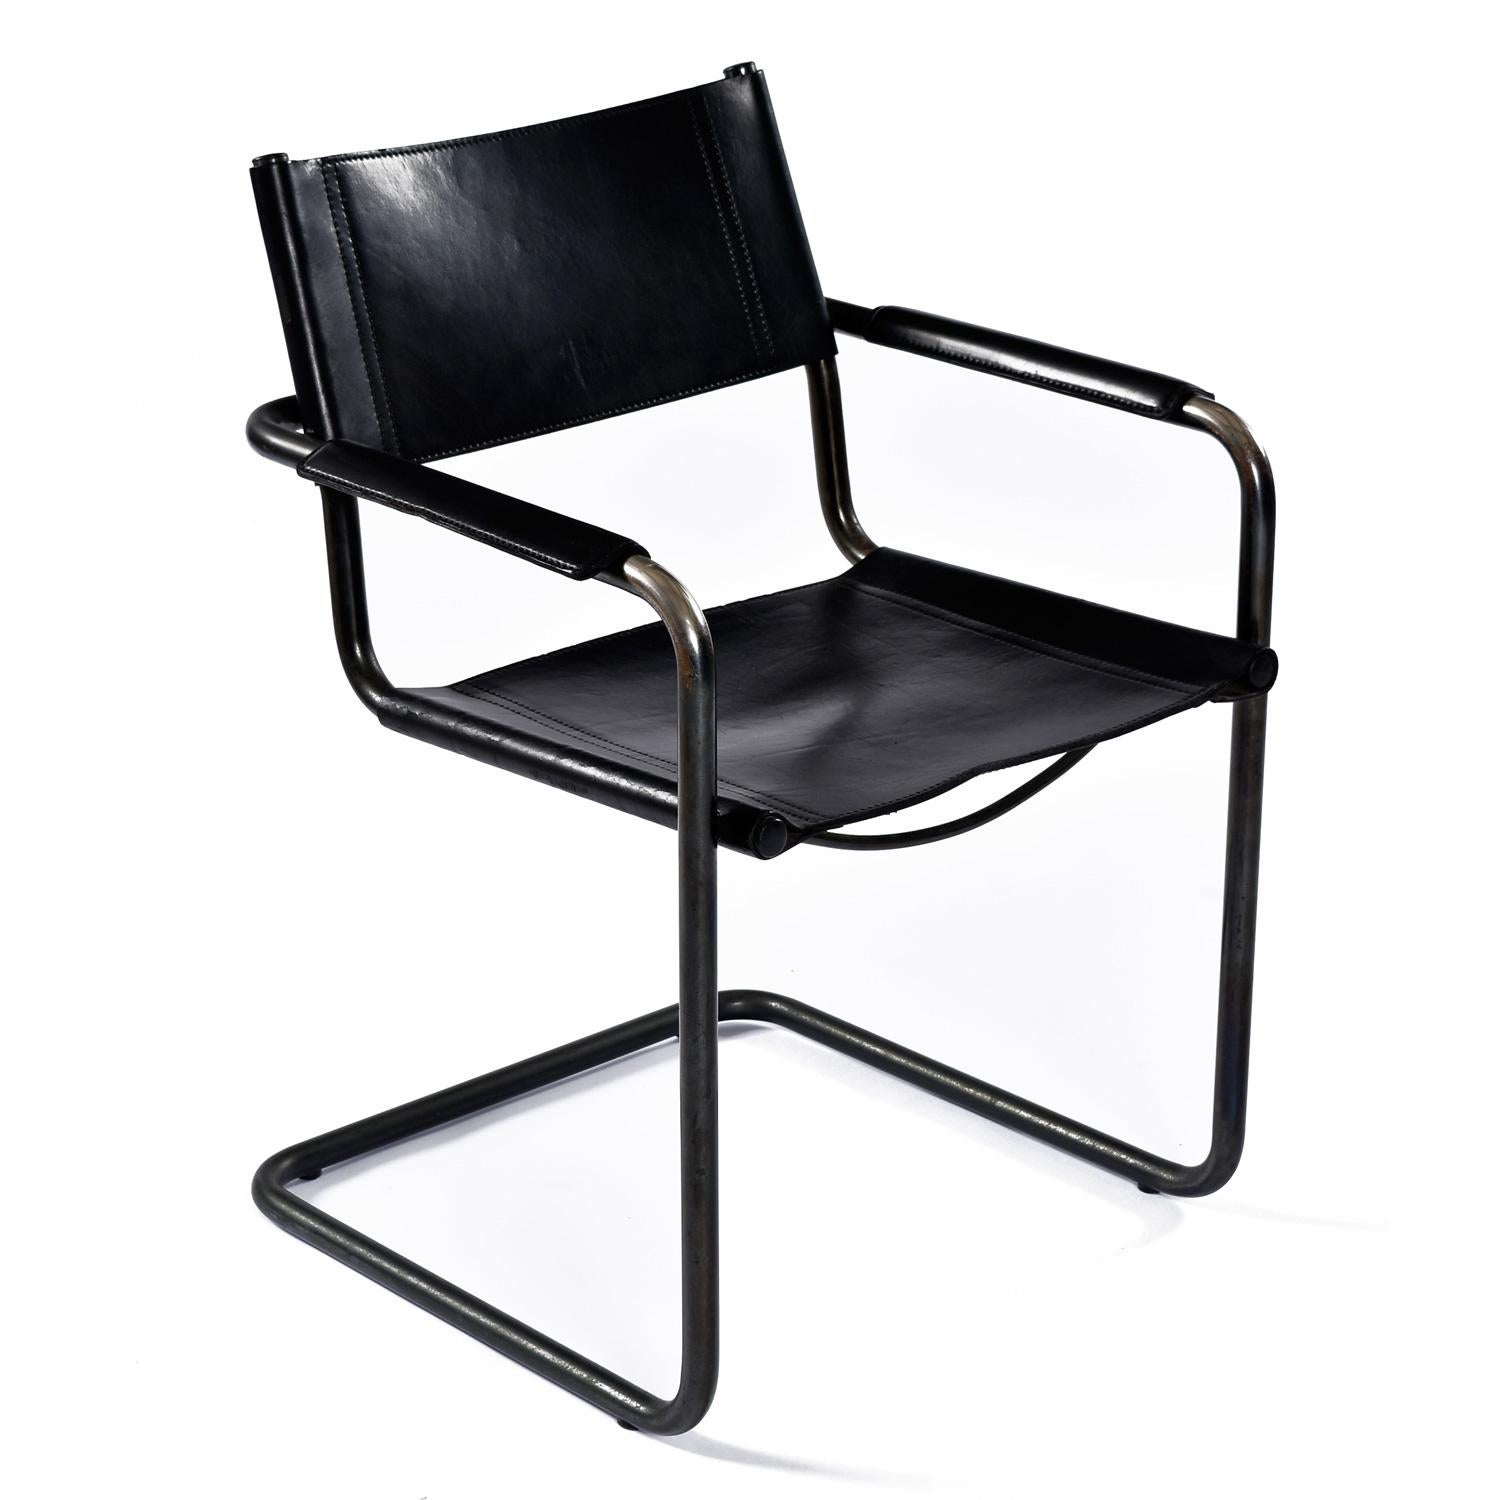 Italian Matteo Grassi Cantilever MG5 Black Leather Chairs by Centro Studi For Sale